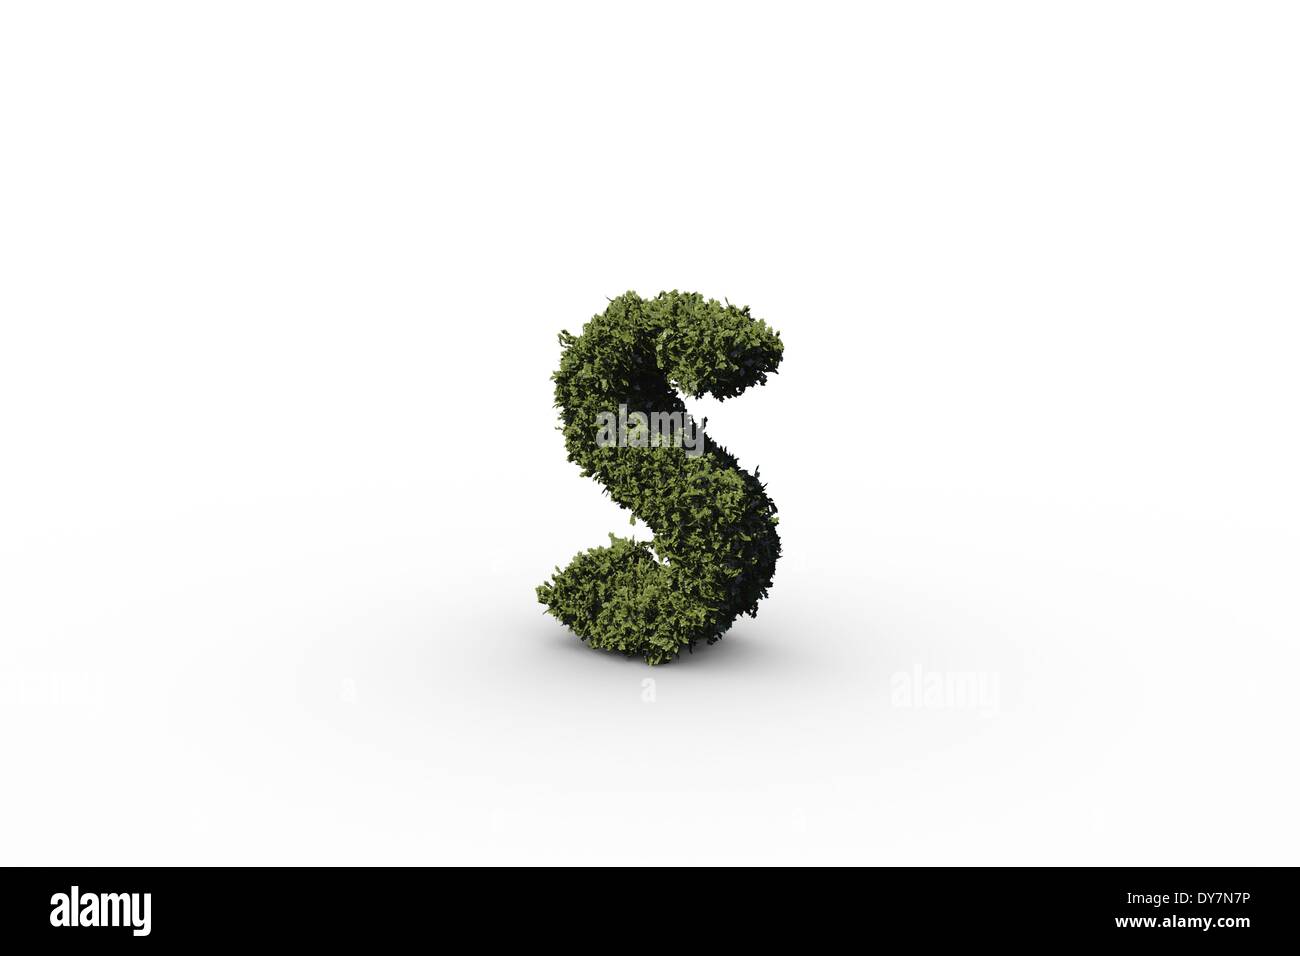 Lower case letter s made of leaves Stock Photo